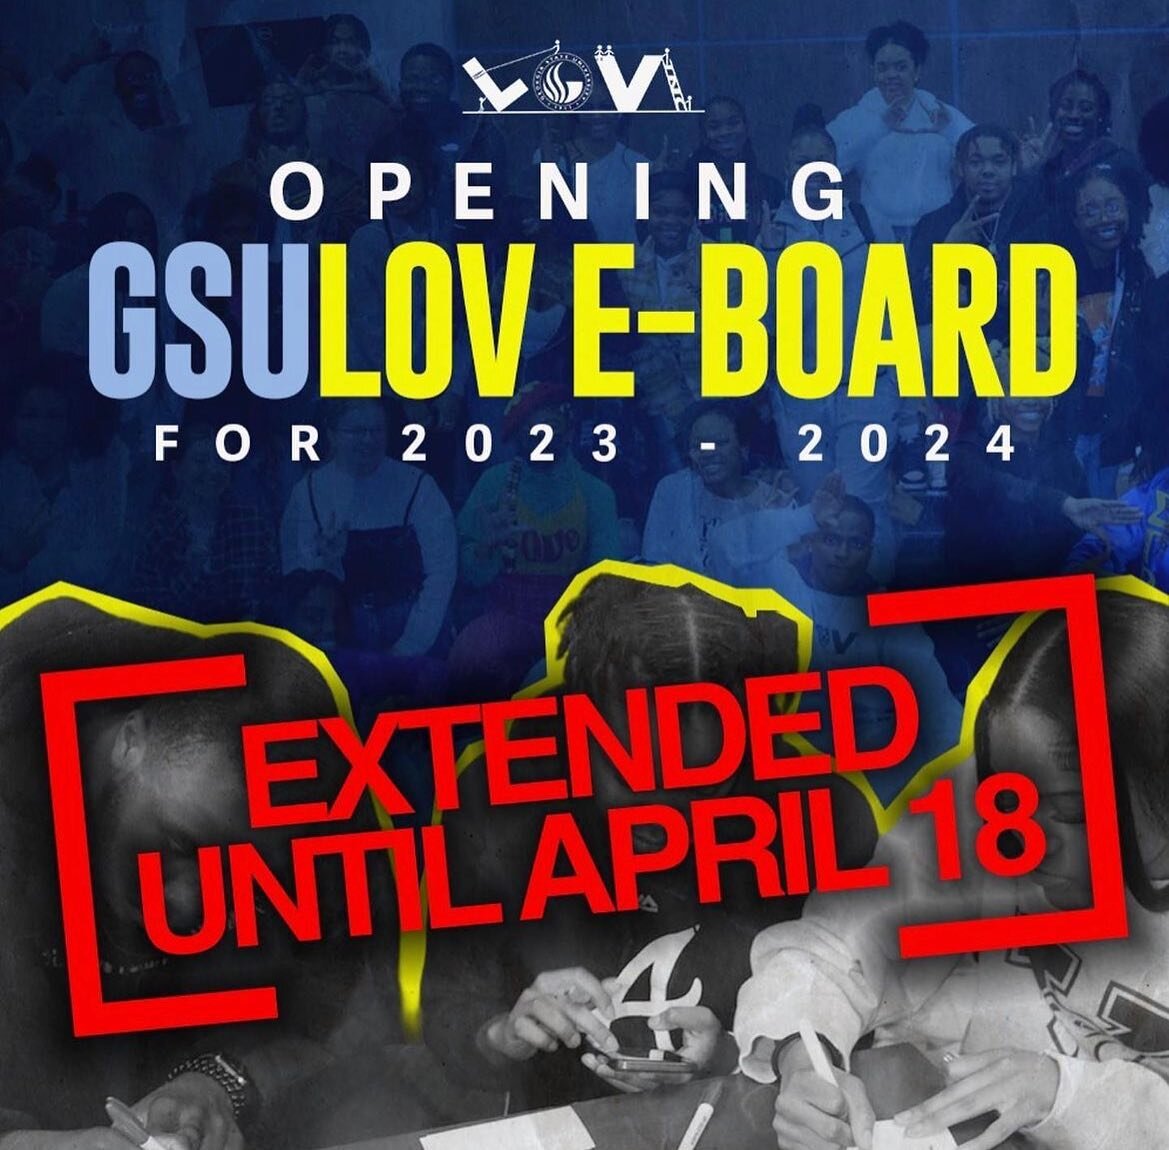 ⚠️GSU E-BOARD CLOSE TODAY AT 11:59PM⚠️ 

Interested in community service and leadership experience? 🥳 Come join the executive board of LOV at GSU! 

Click the link in our bio to apply and read more about what each open position has to offer!